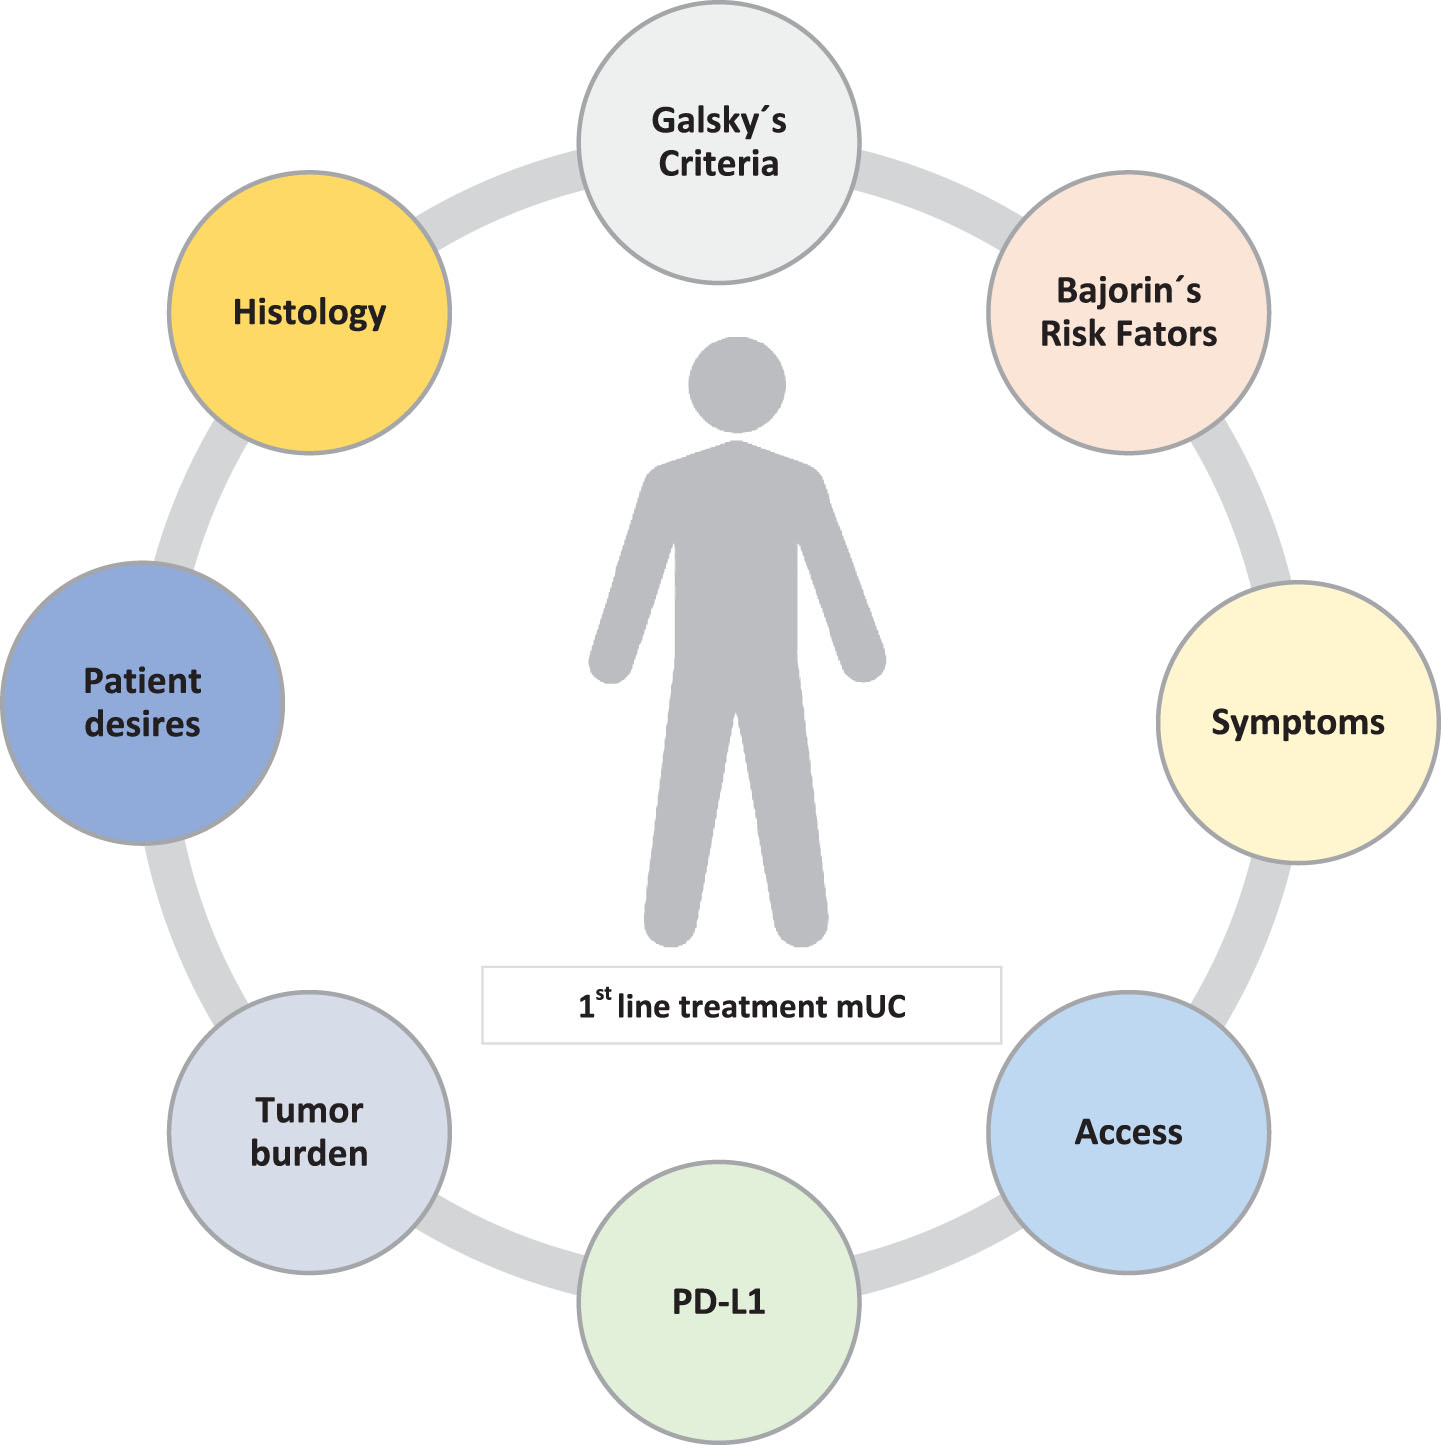 Factors that may condition for therapeutic decision.